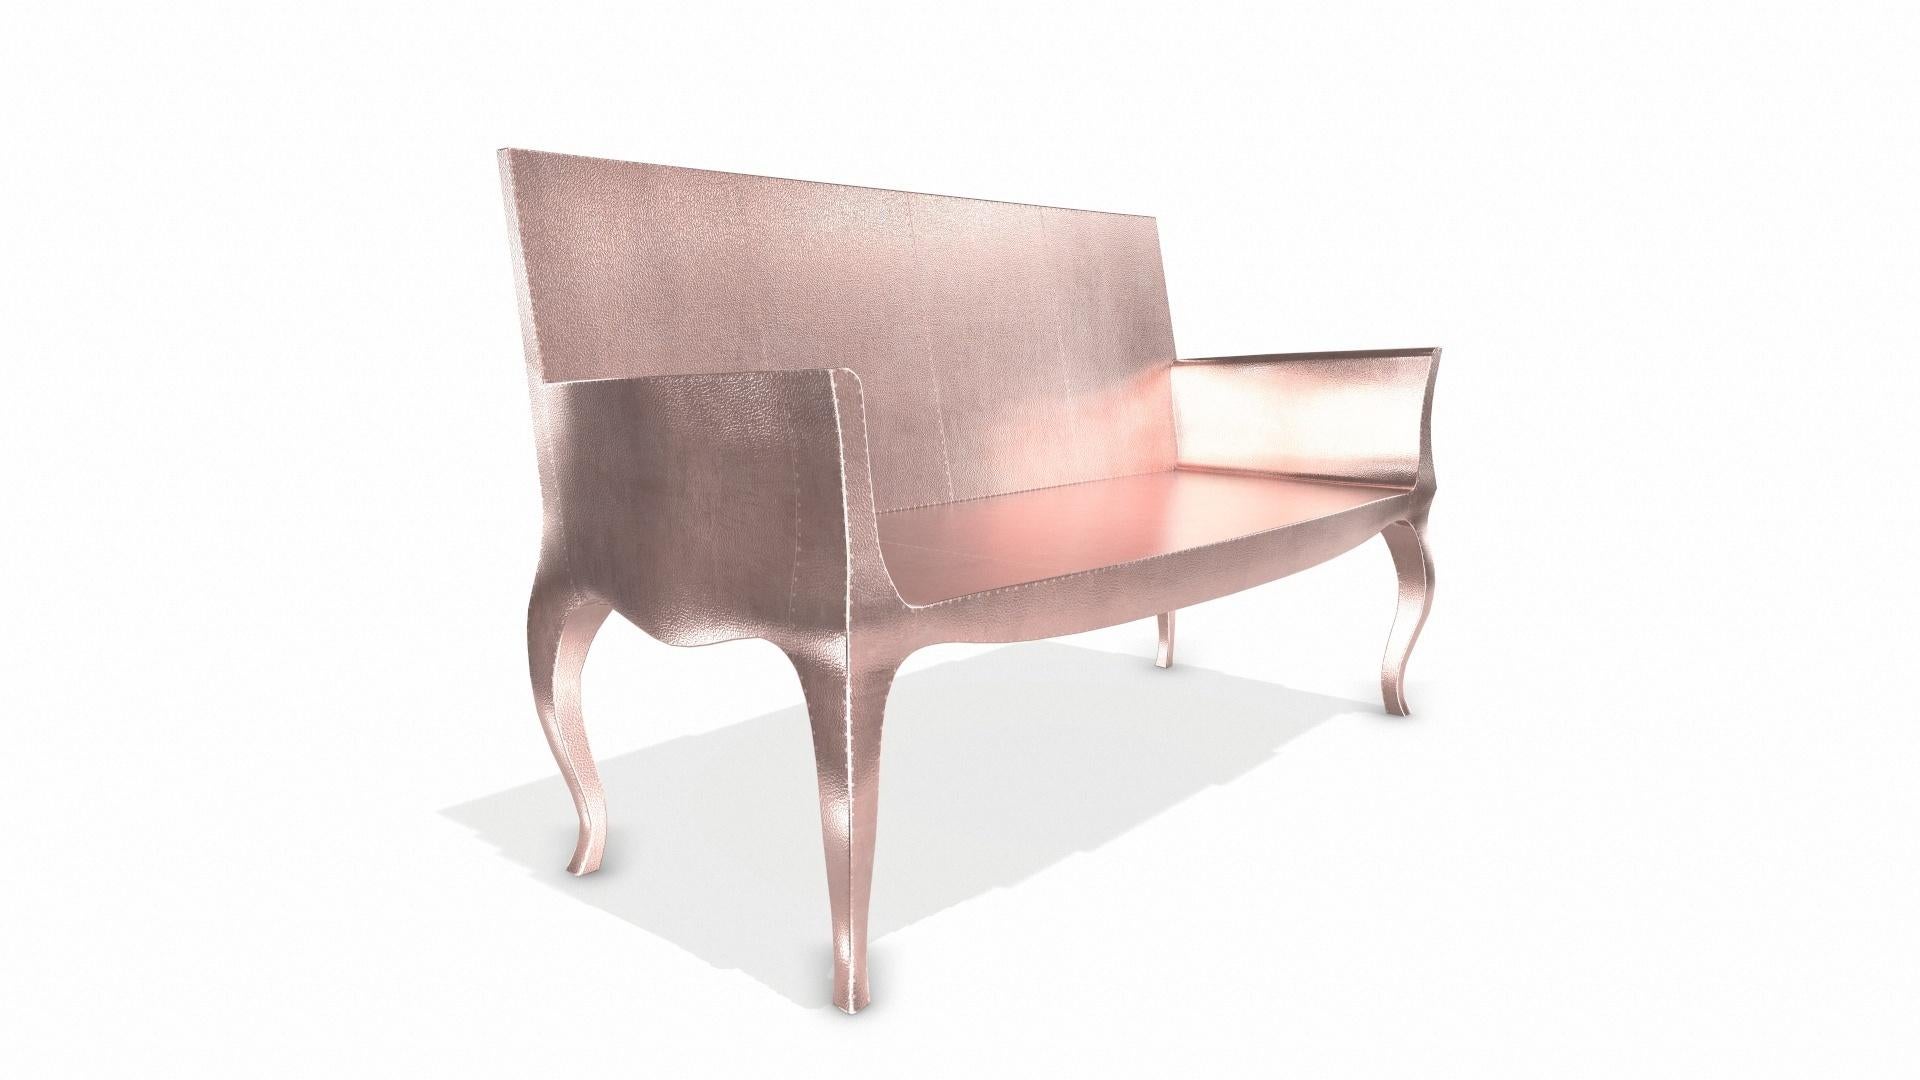 Louise Settee Art Deco Daybeds in Fine Hammered Copper by Paul Mathieu In New Condition For Sale In New York, NY